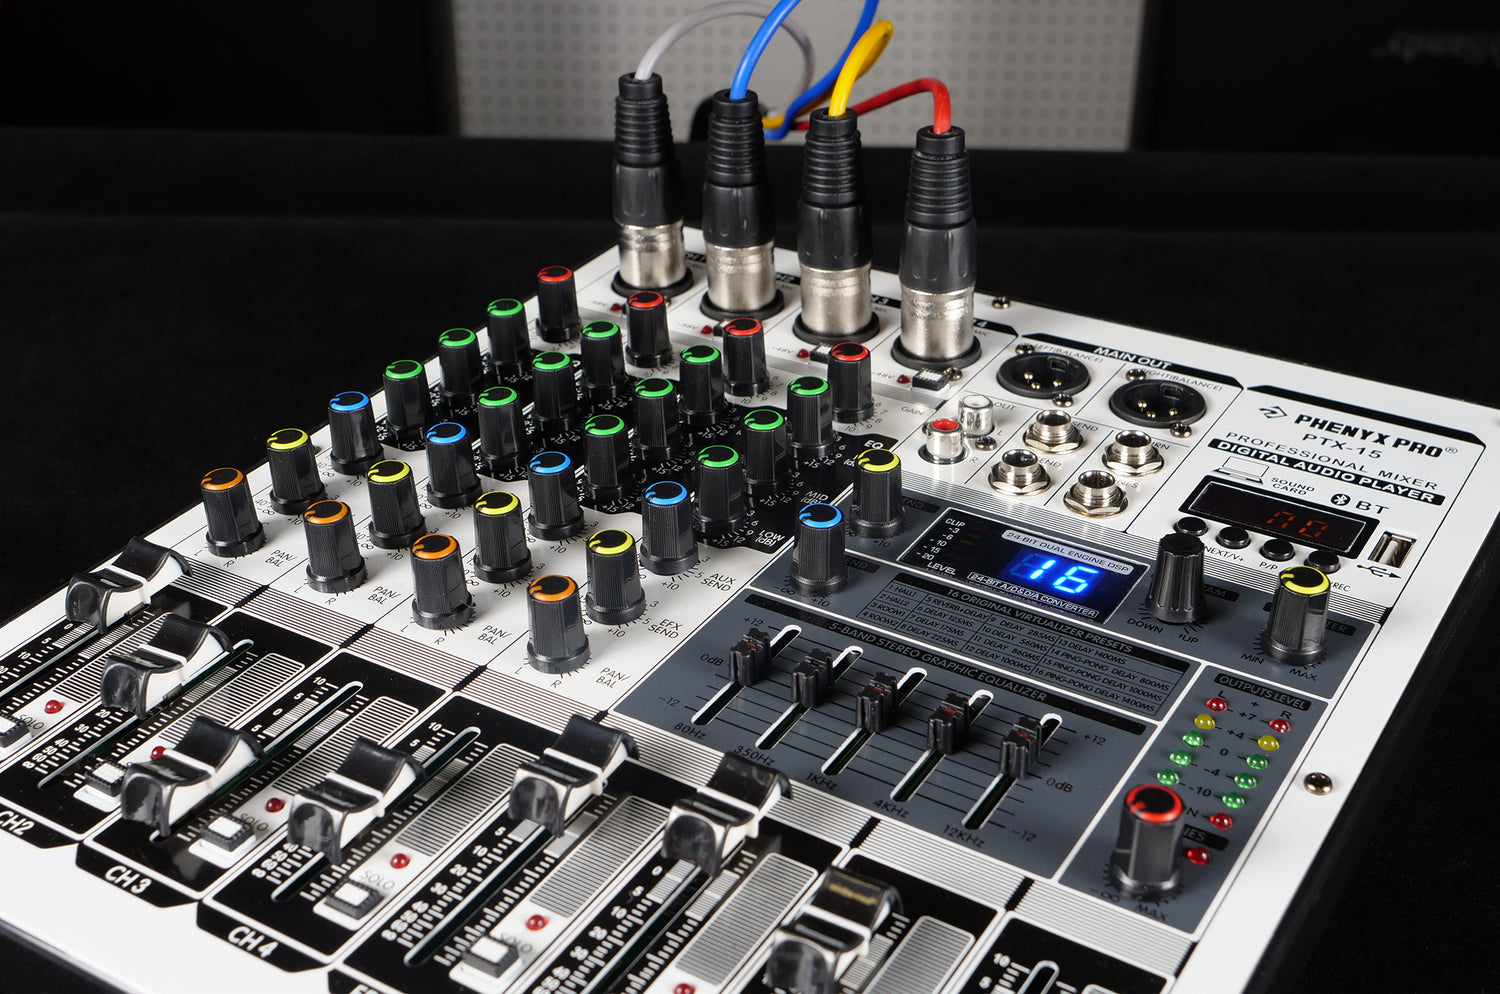 How to Use PC Function for the PTX-15 Mixer